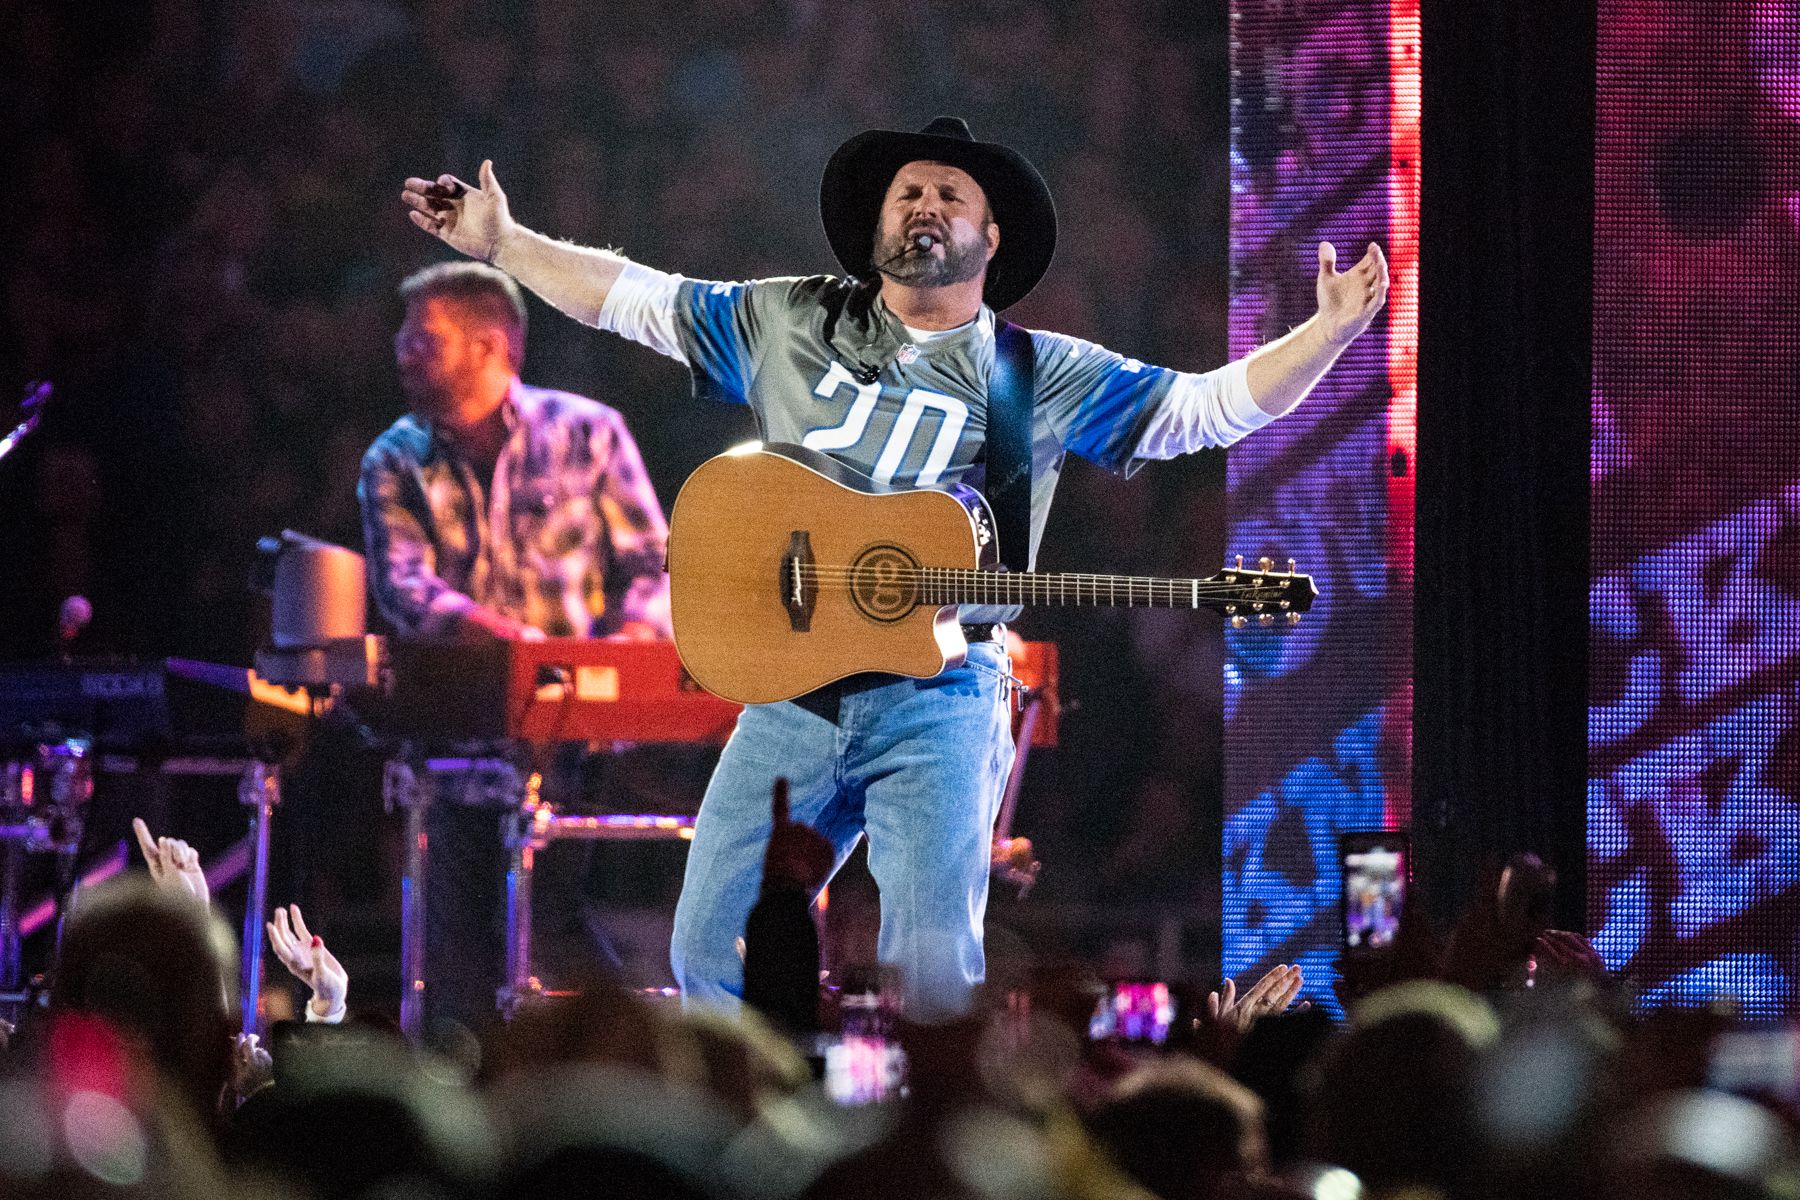 Confused fans rip Garth Brooks for wearing 'Sanders' jersey